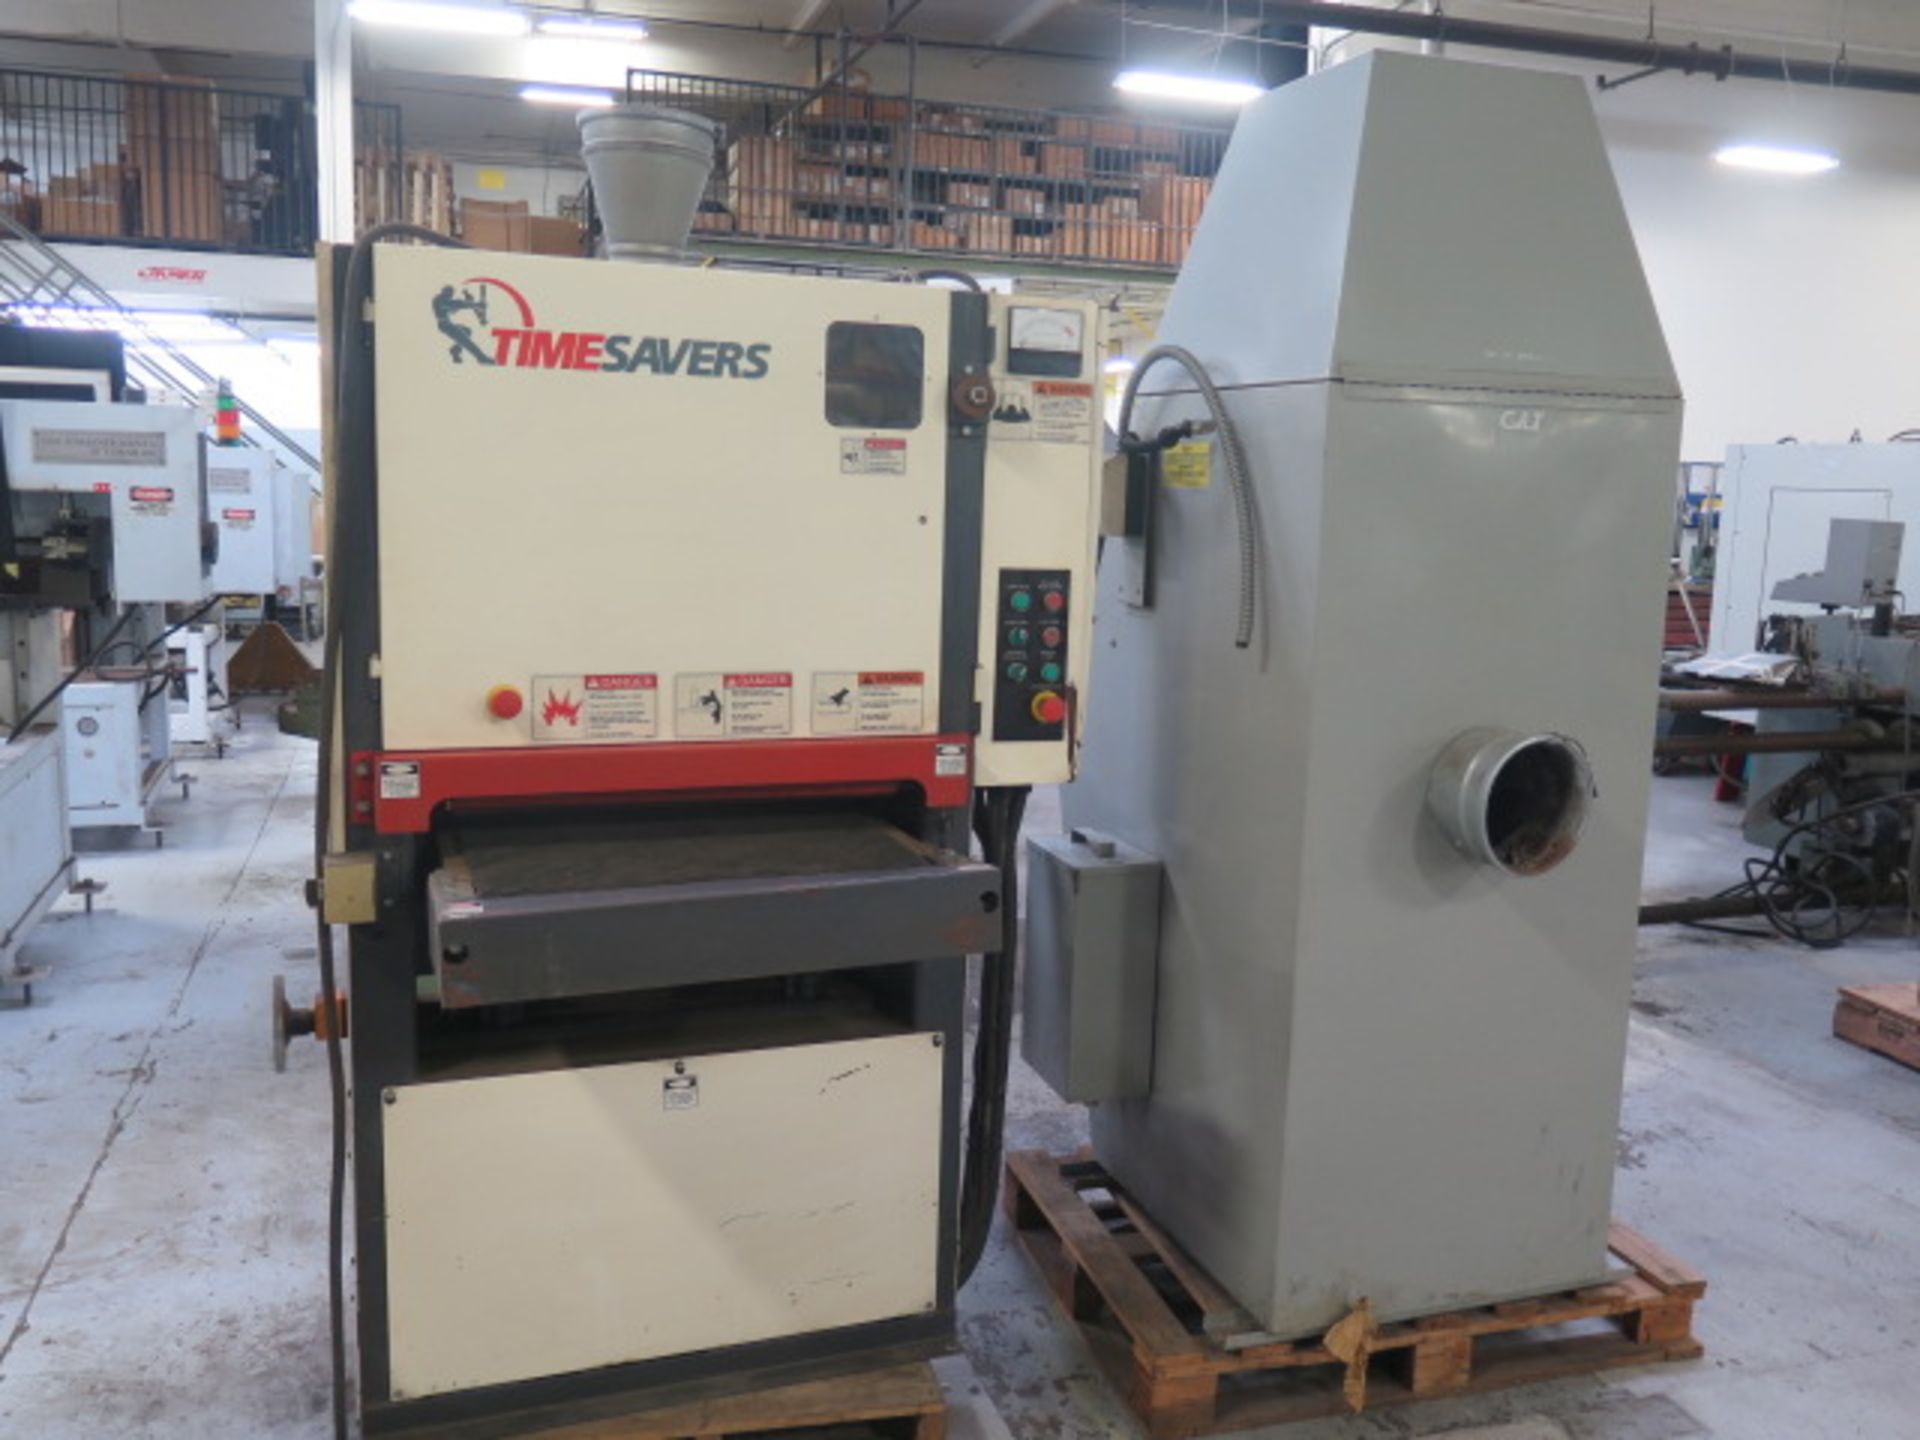 Timesavers mdl. 1211-12-0 12” Belt Grainer s/n 29913 w/ Cat mdl. C-5 Water-Filtered Dust Collector